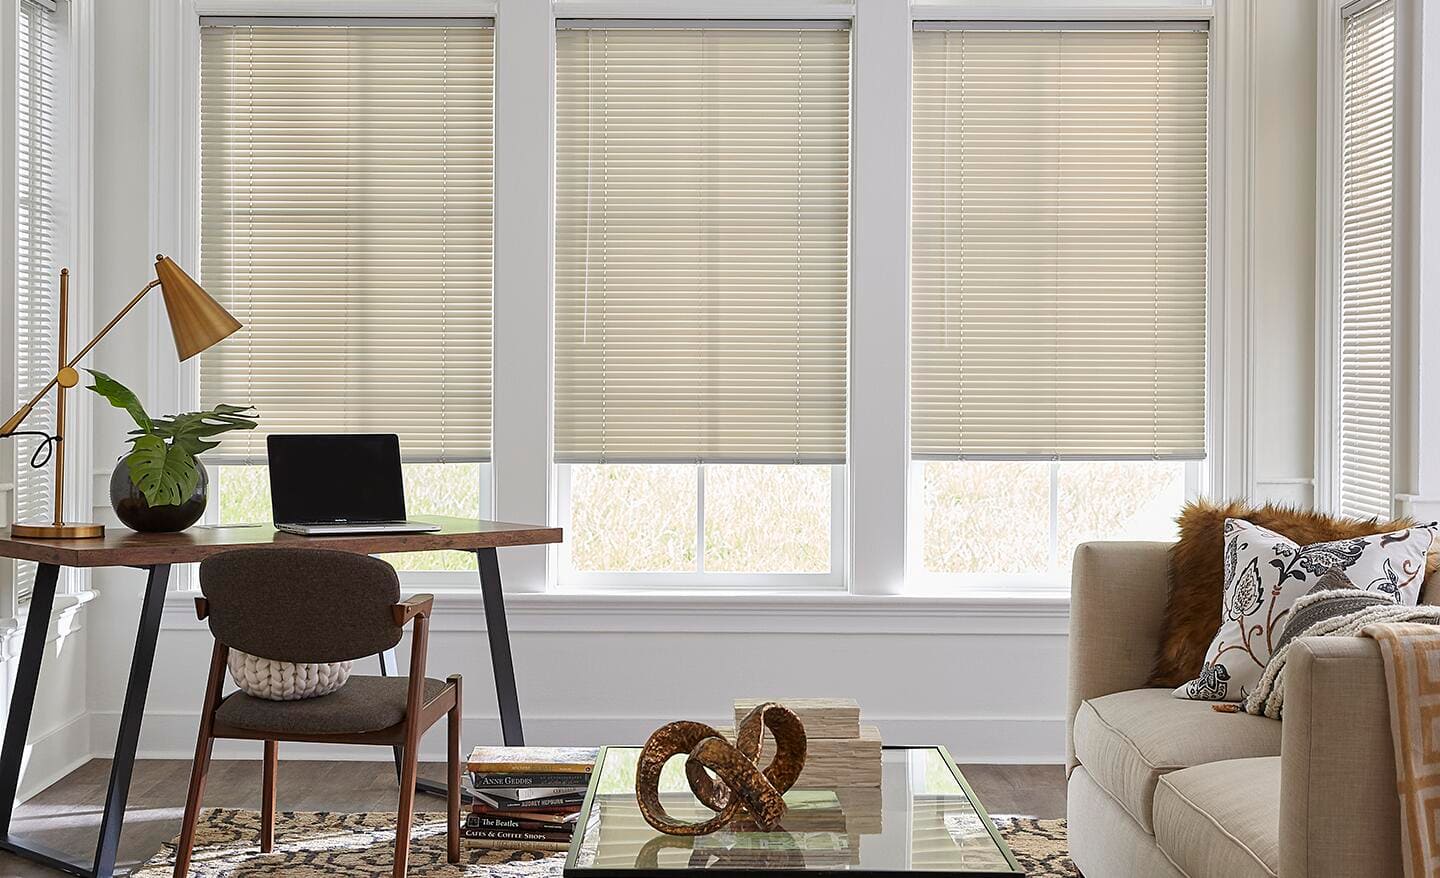 Vinyl blinds cover the windows in a small living area.